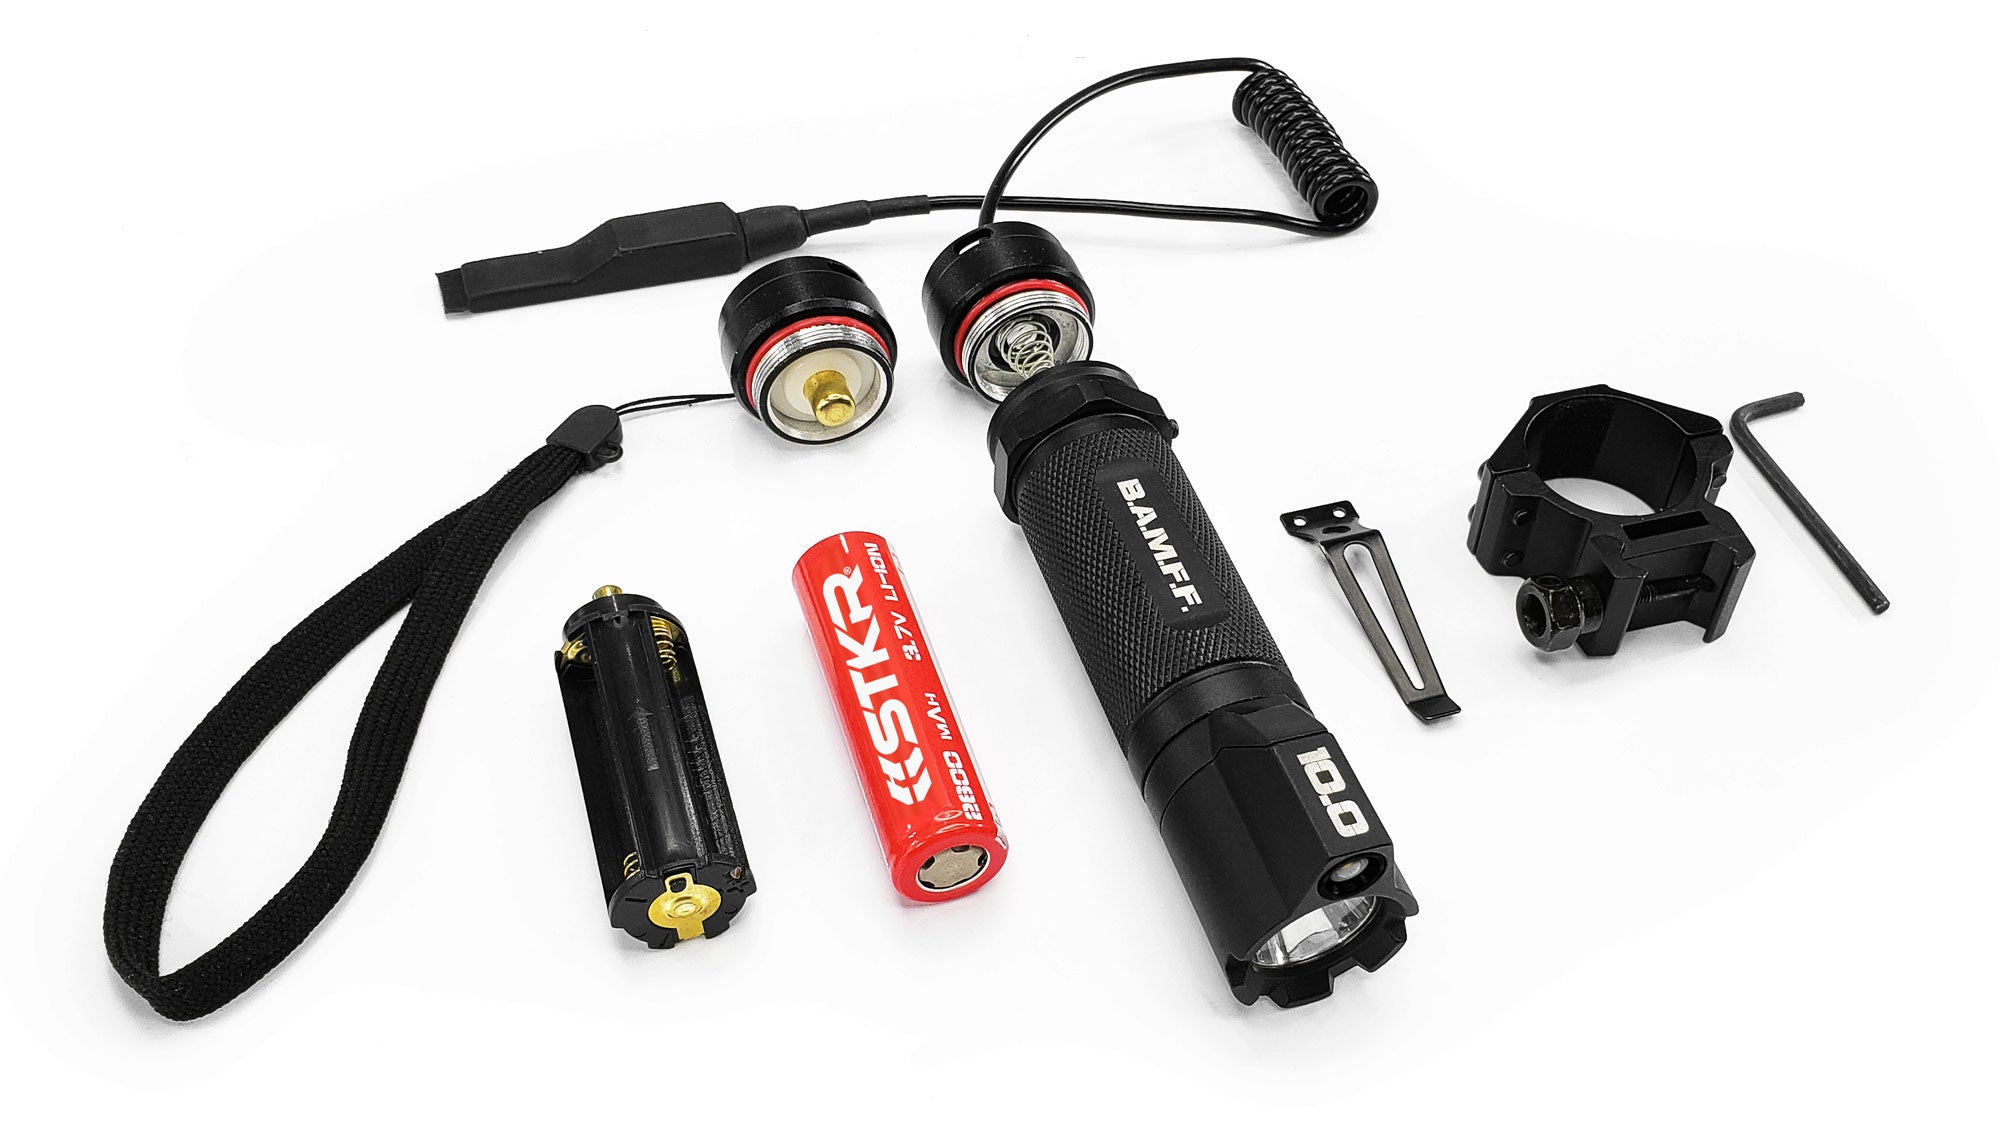 The STKR Concepts BAMFF 10.0 Dual LED Tactical Flashlight